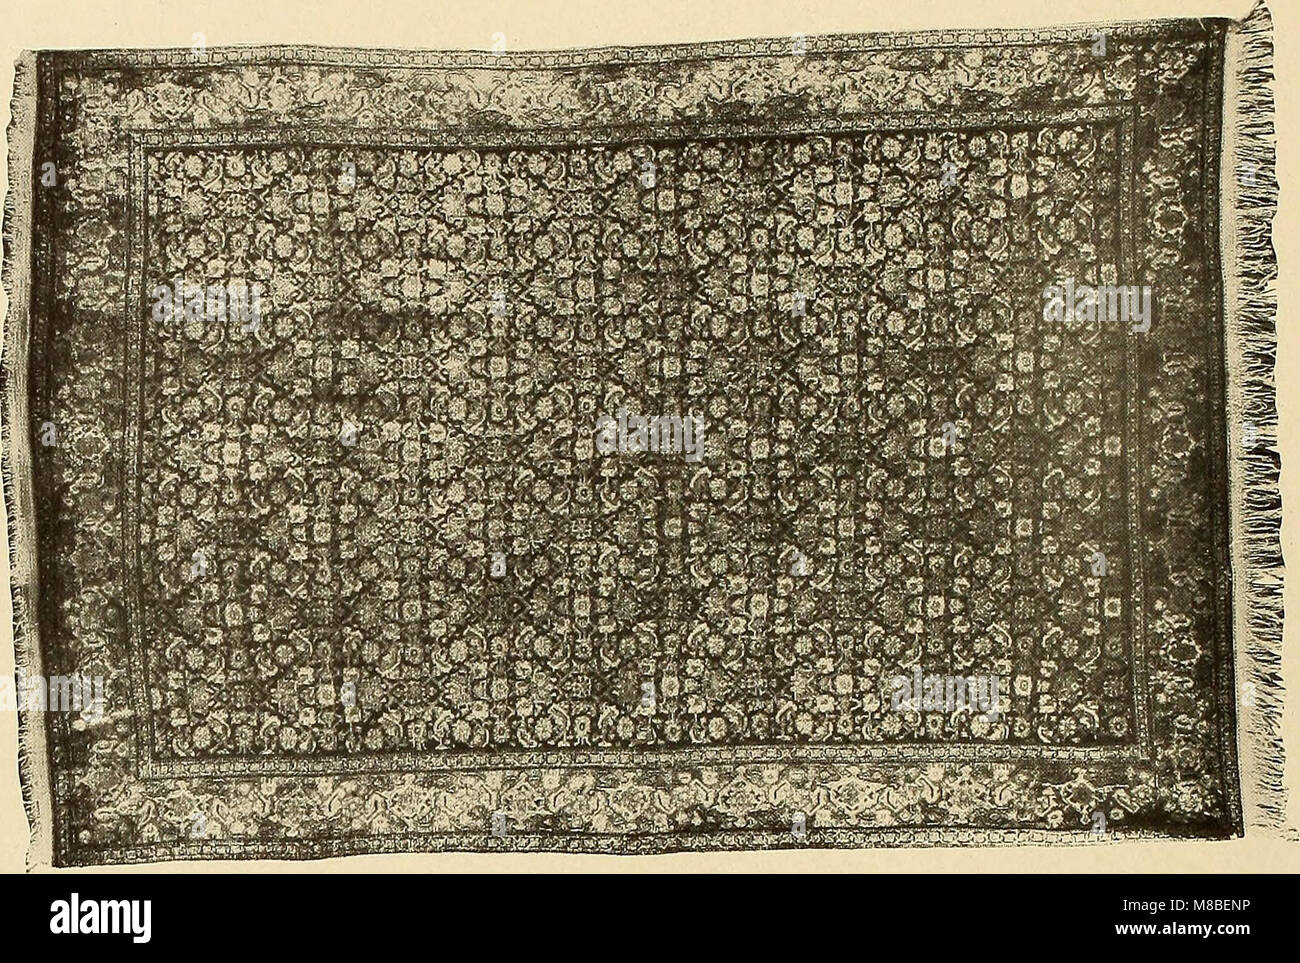 Decorative textiles; an illustrated book on coverings for furniture, walls and floors, including damasks, brocades and velvets, tapestries, laces, embroideries, chintzes, cretonnes, drapery and (14760502136) Stock Photo